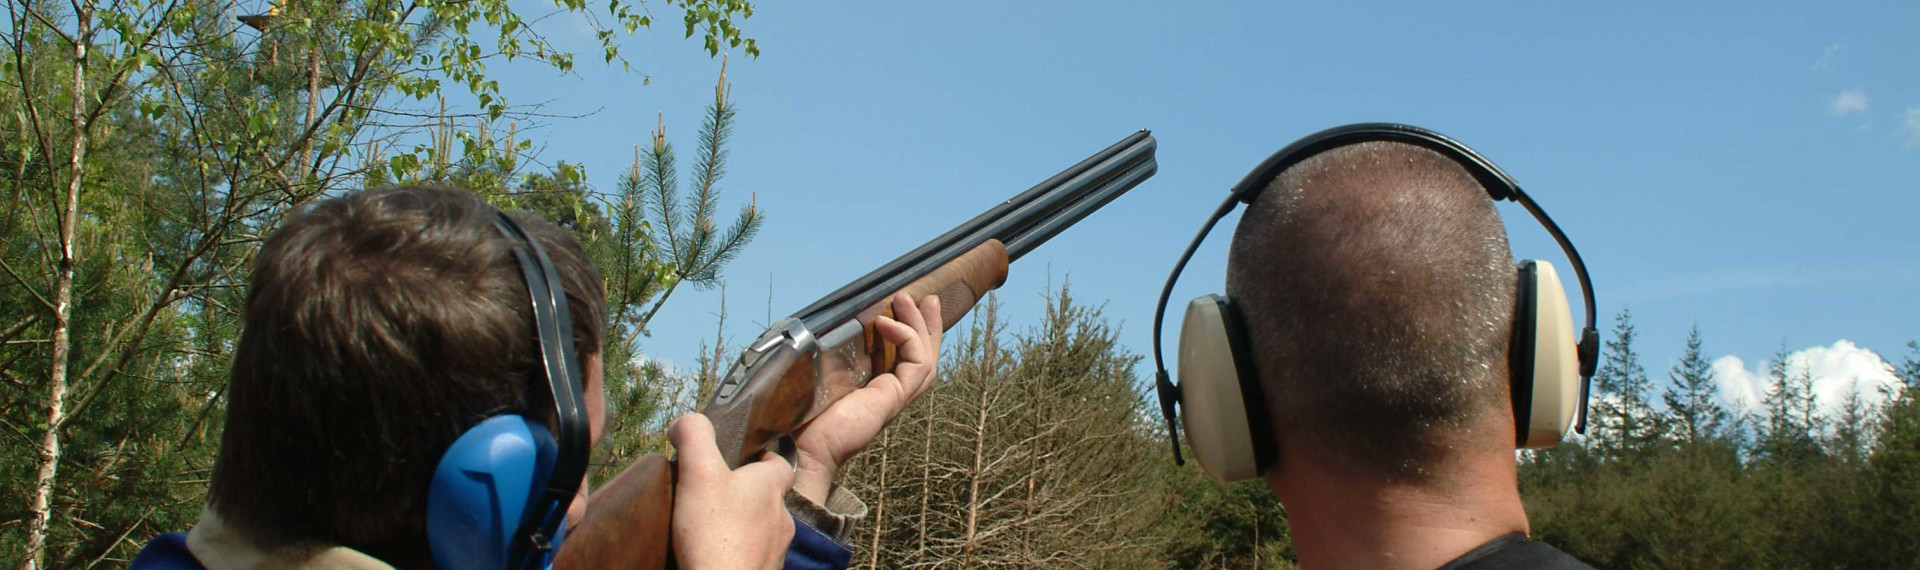 Clay-pigeon Shooting